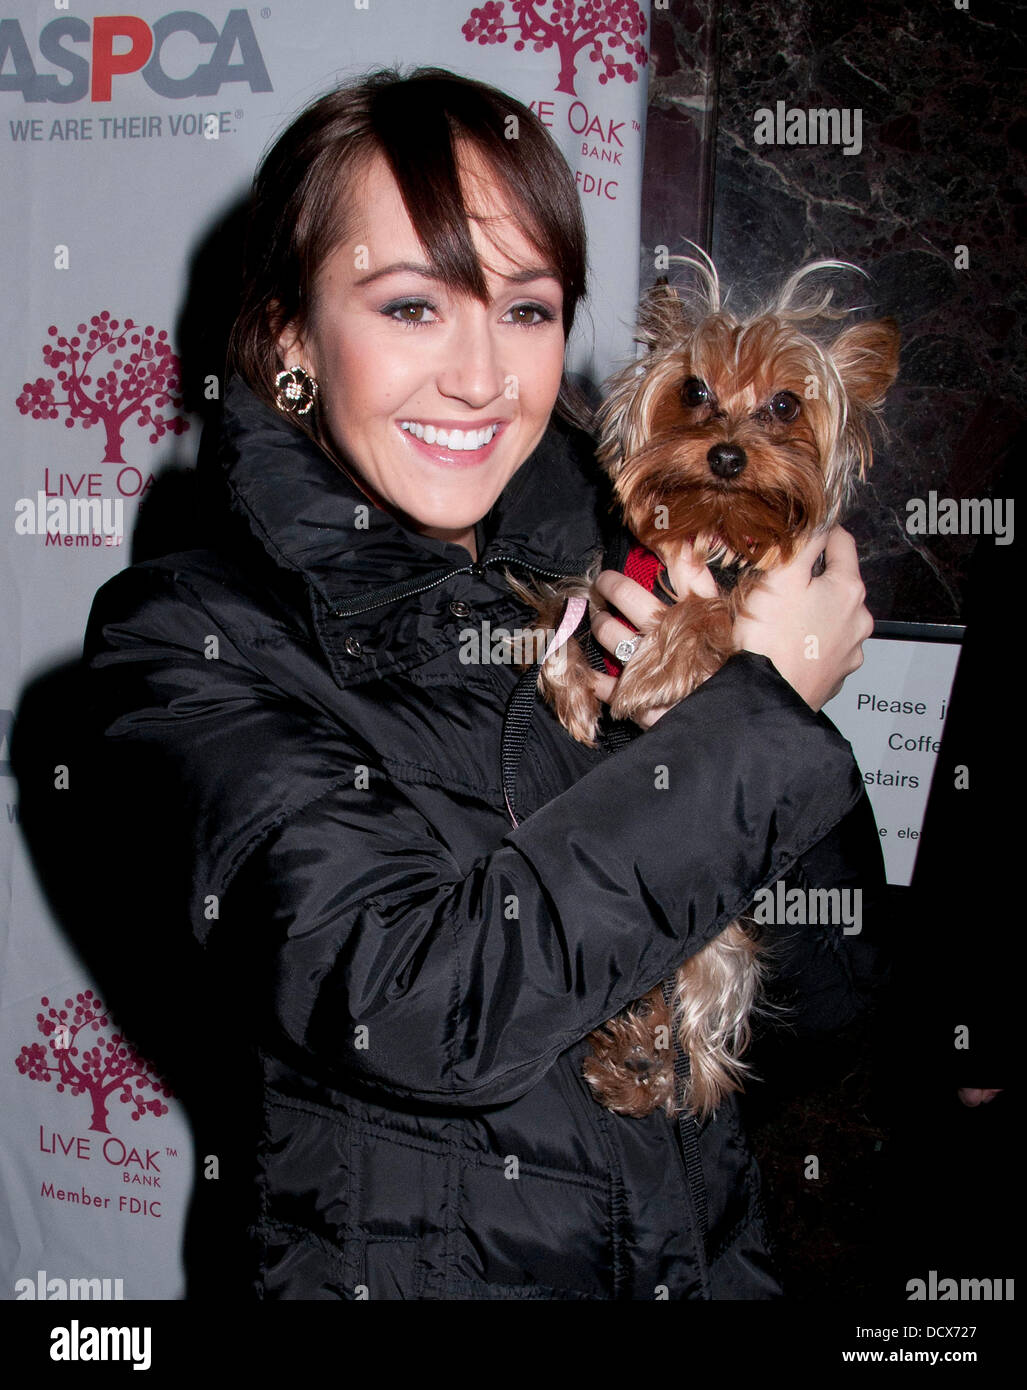 Ashley Hebert and her Yorkie BOO at the 3rd Annual ASPCA Blessing of the Animals at Christ Church. New York City, USA - 11.12.11 Stock Photo